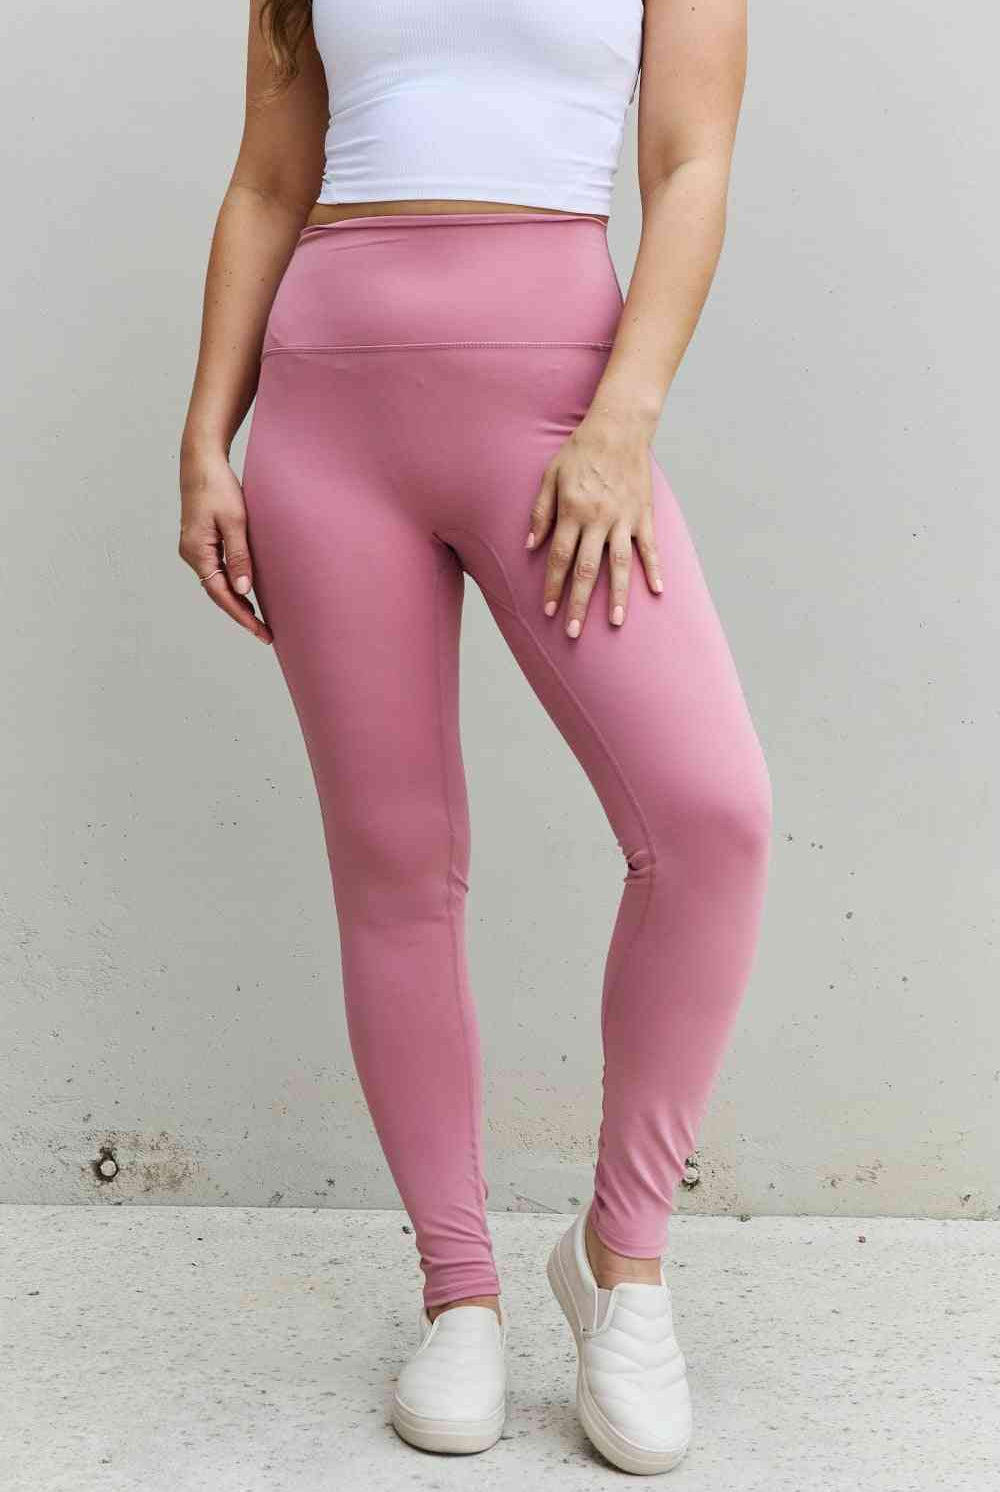 Gray Fit For You Full Size High Waist Active Leggings in Light Rose activewear